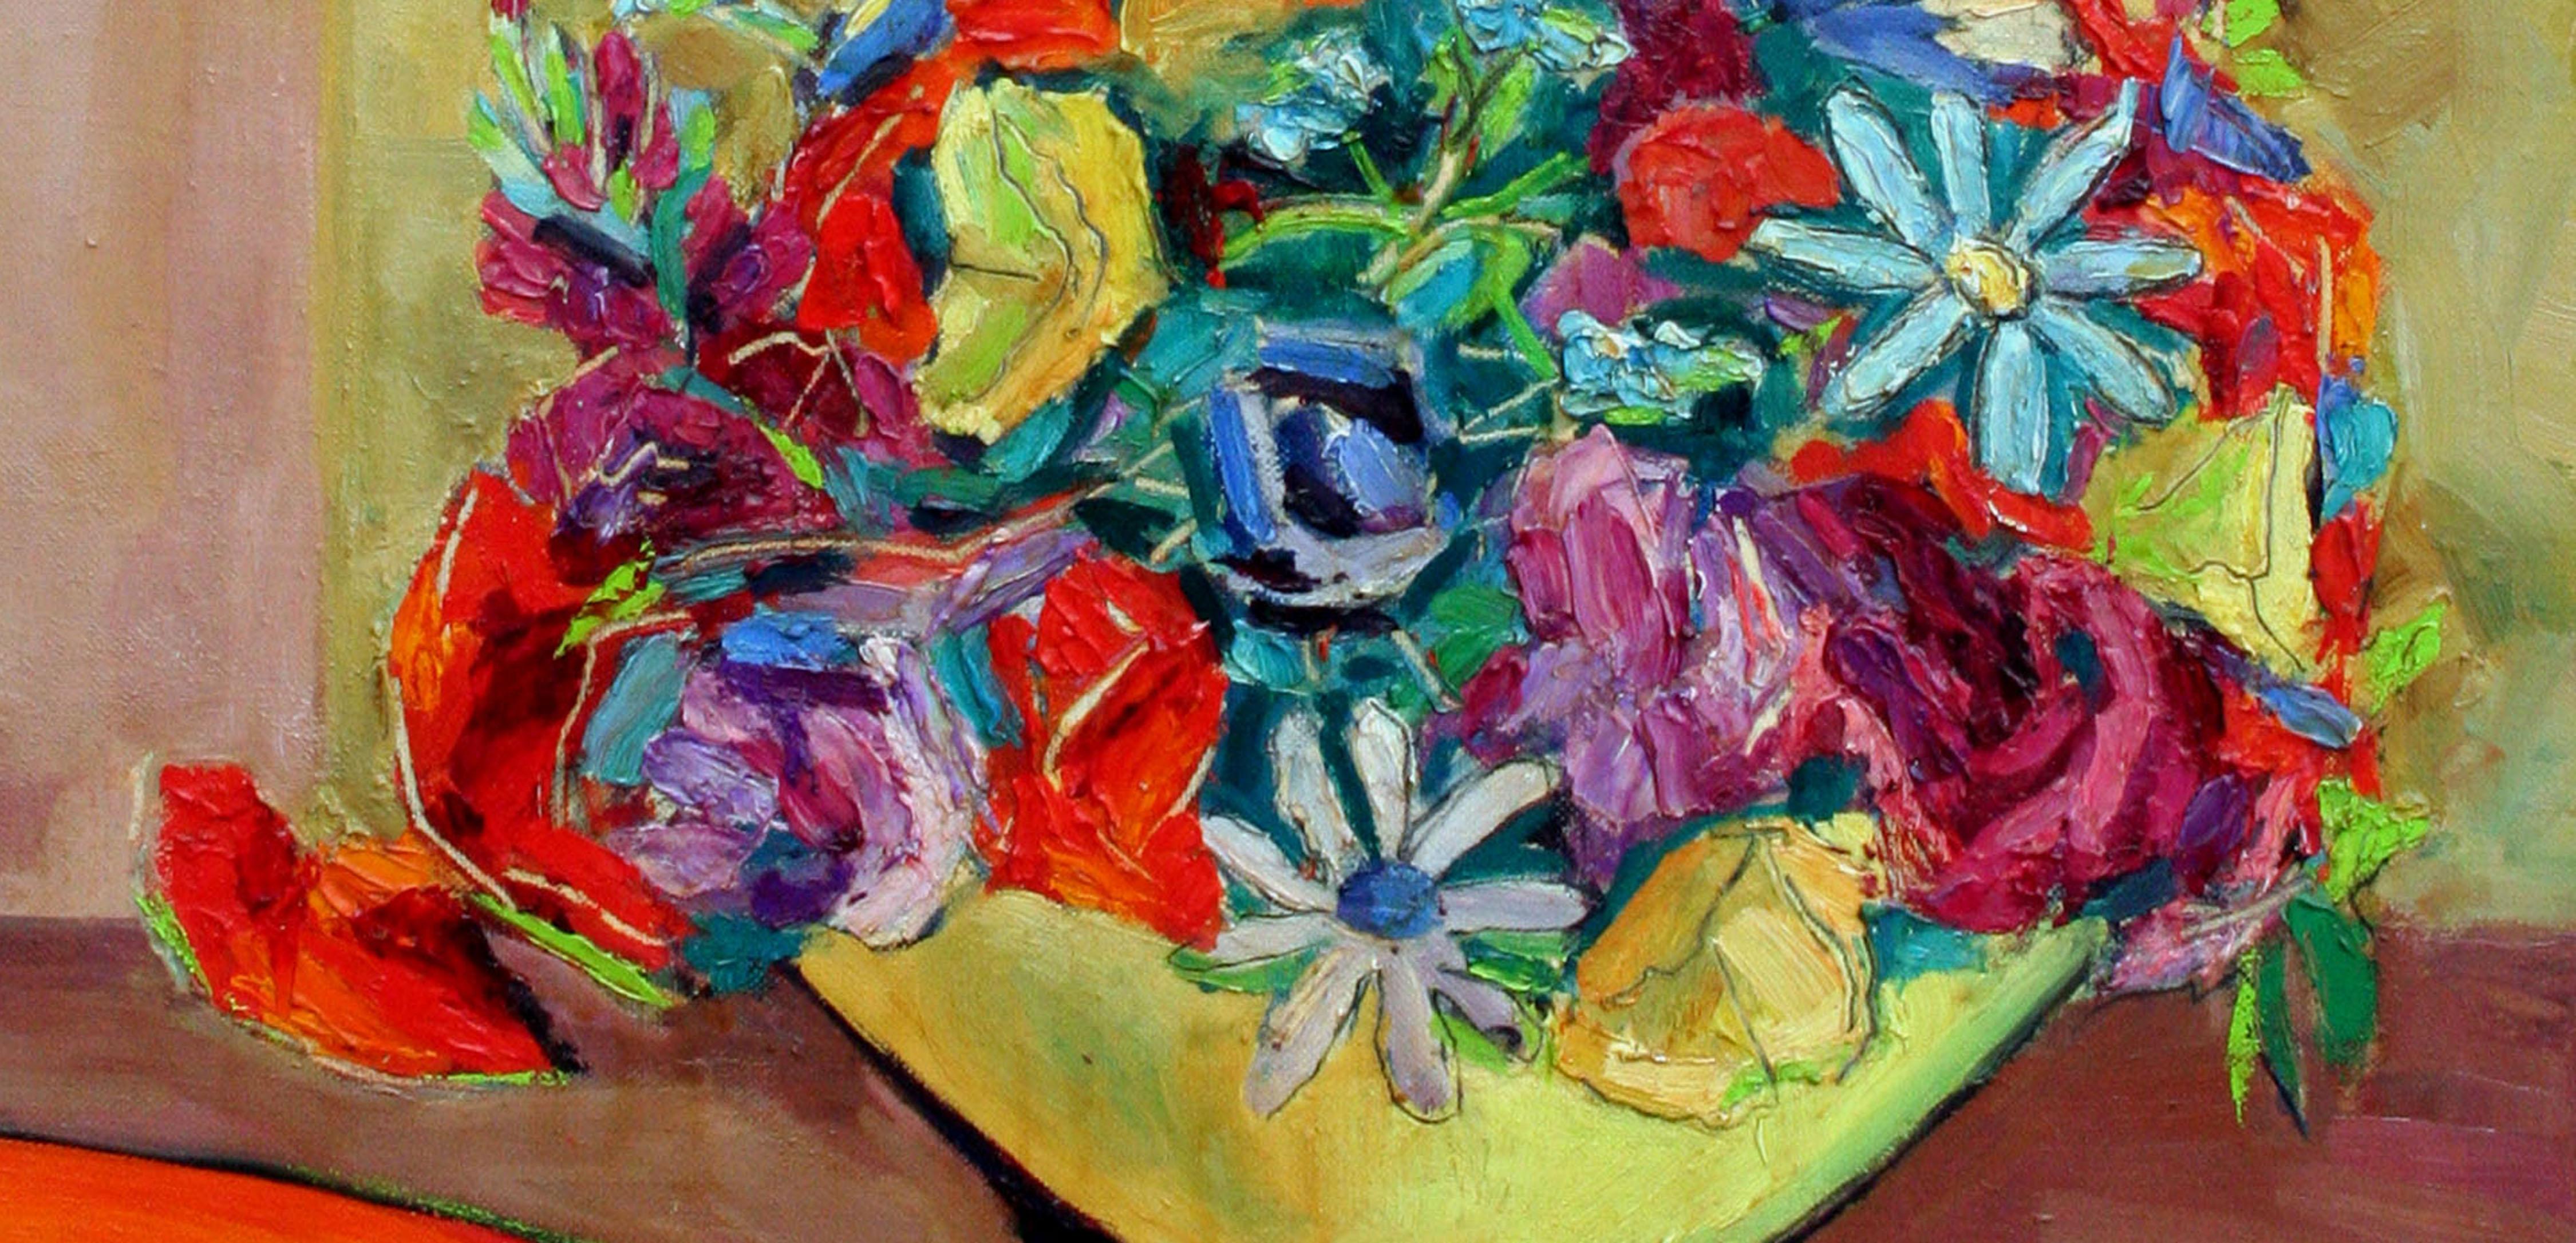 Mid Century Modern Multi-Color Bouquet, Yellow Vase of Flowers Still Life - Painting by Virginia Rogers